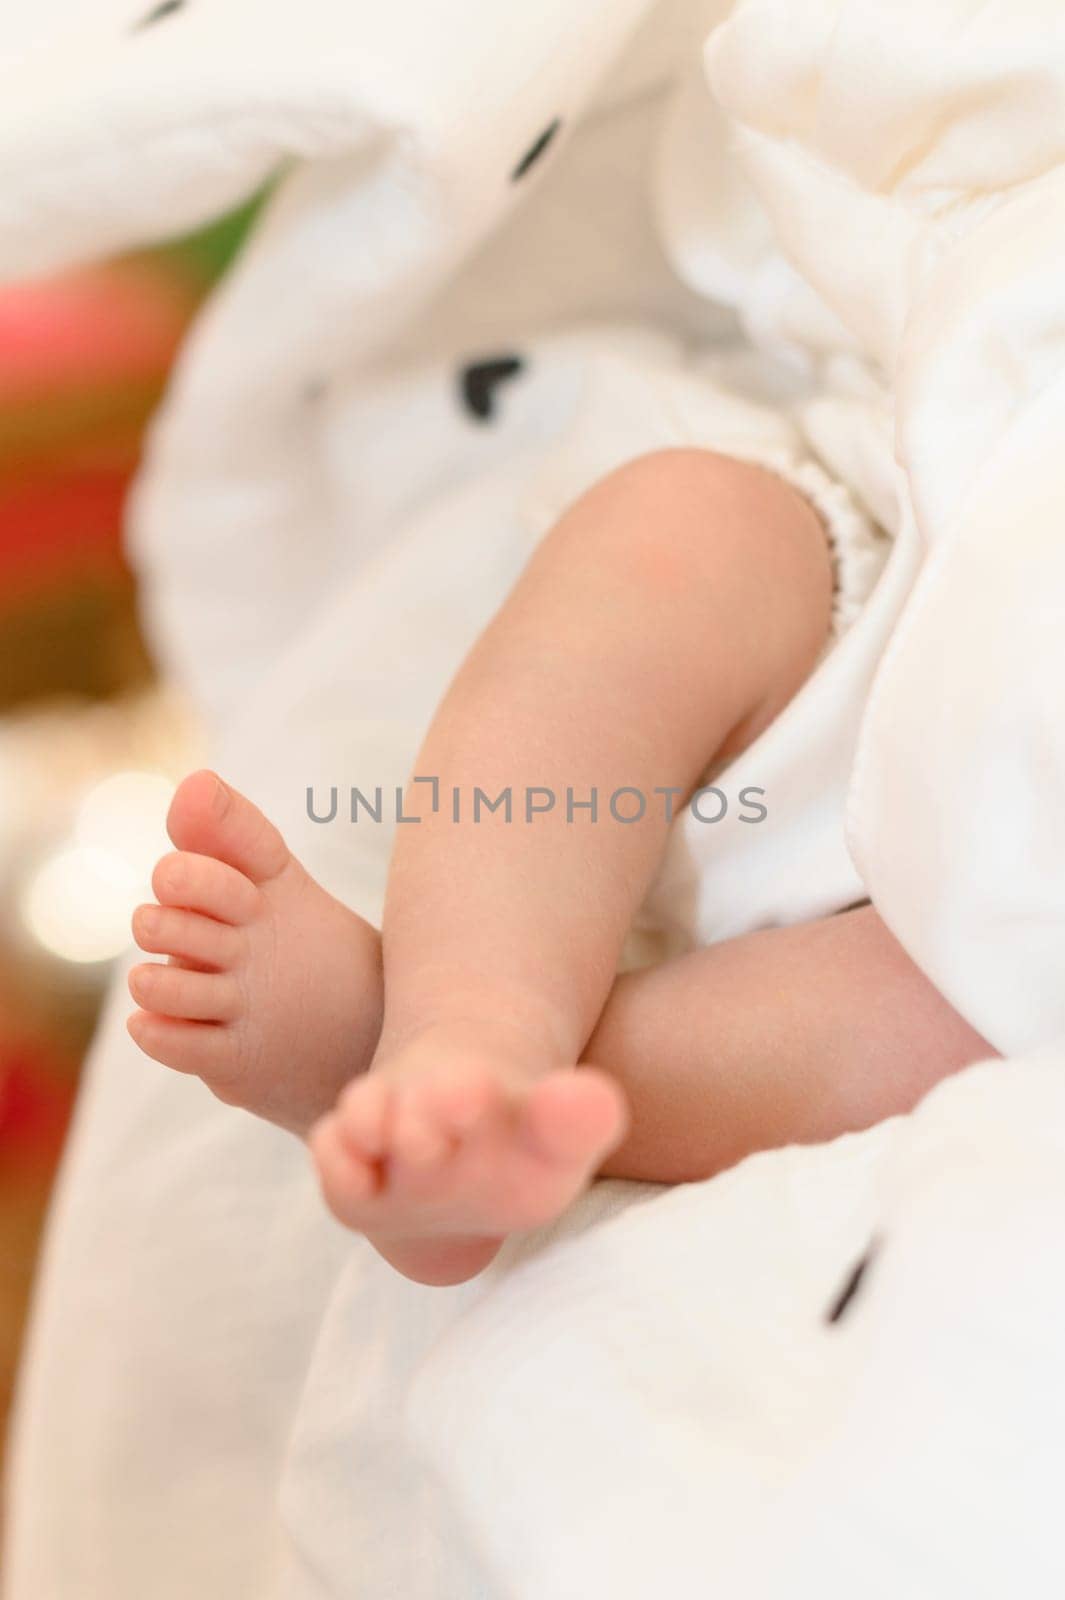 A baby's small leg during baptism on a white sheet, newborn baby.